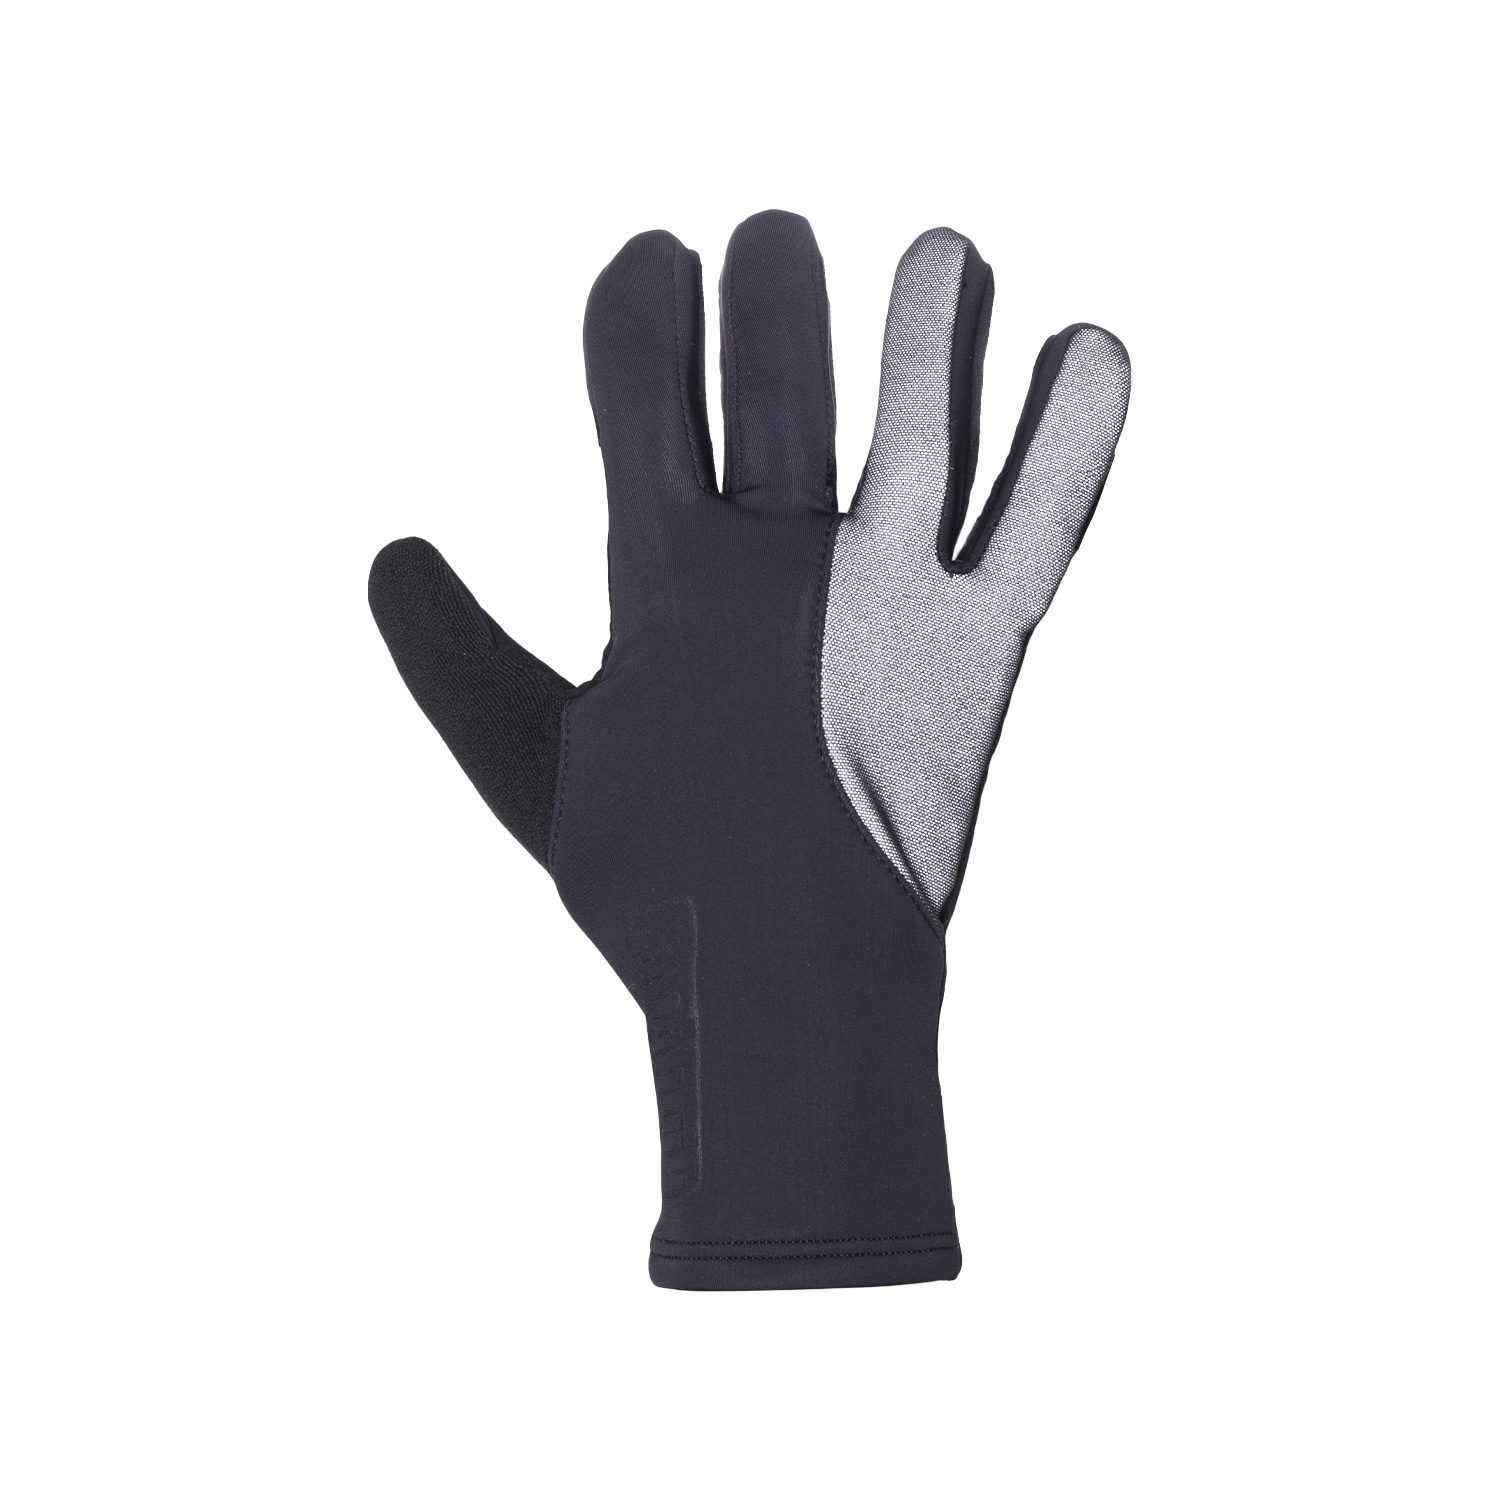 Glove One Tempest Protect